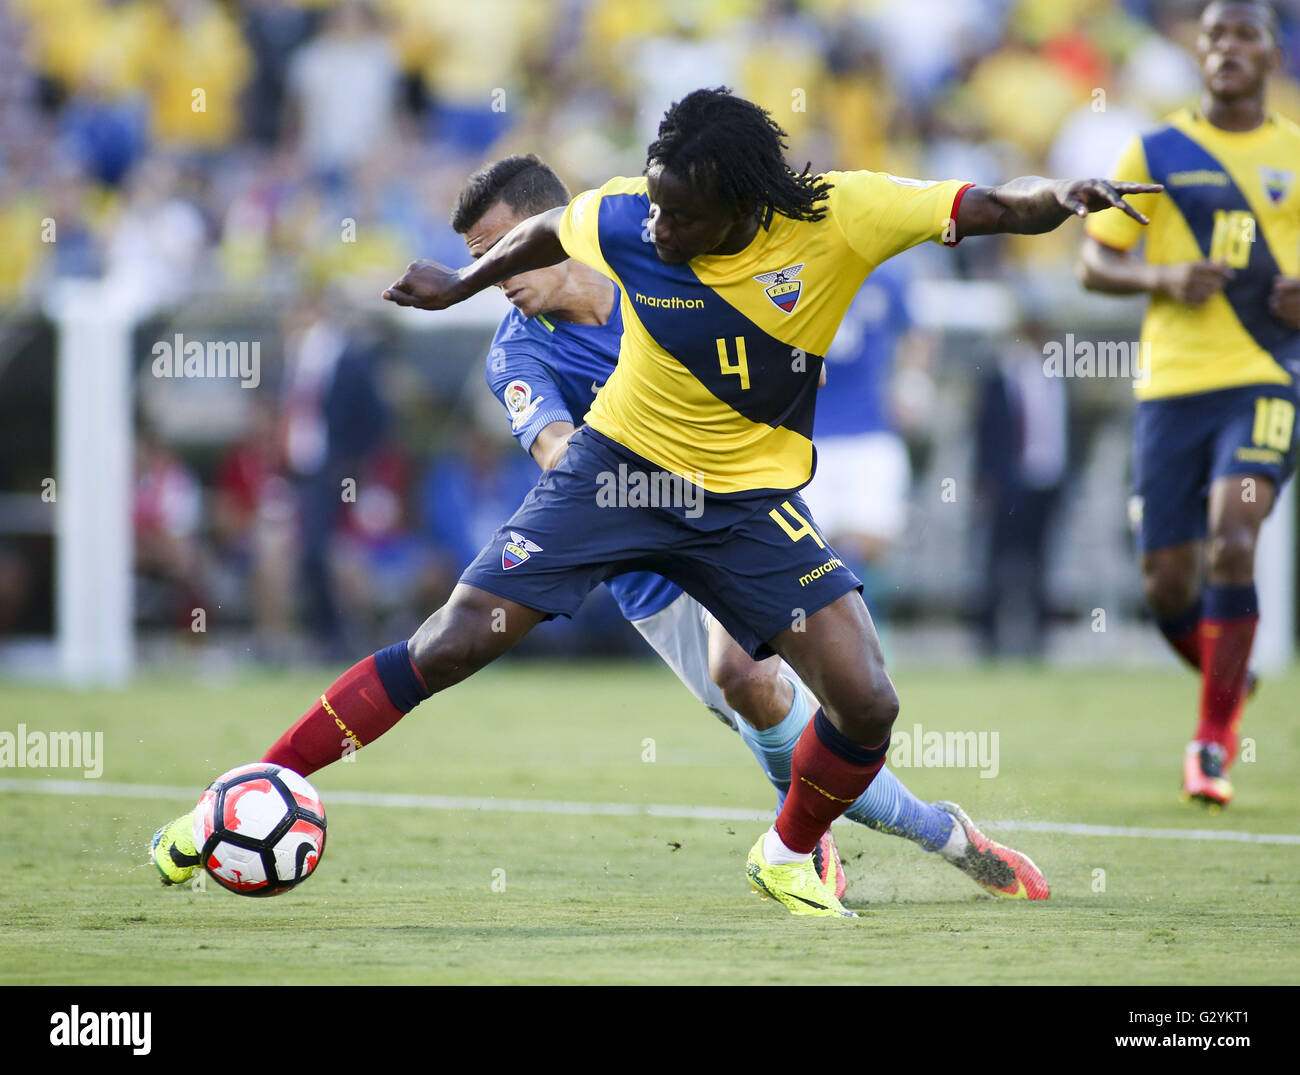 June 4, 2016 - Los Angeles, California, U.S - cuador defender Juan Carlos Paredes #4 and Brazil midfielder Philippe Coutinho #22 in actions during a Copa America soccer match between Brazil and Ecuador at the Rose Bowl in Pasadena, California, June 4, 2016. (Credit Image: © Ringo Chiu via ZUMA Wire) Stock Photo